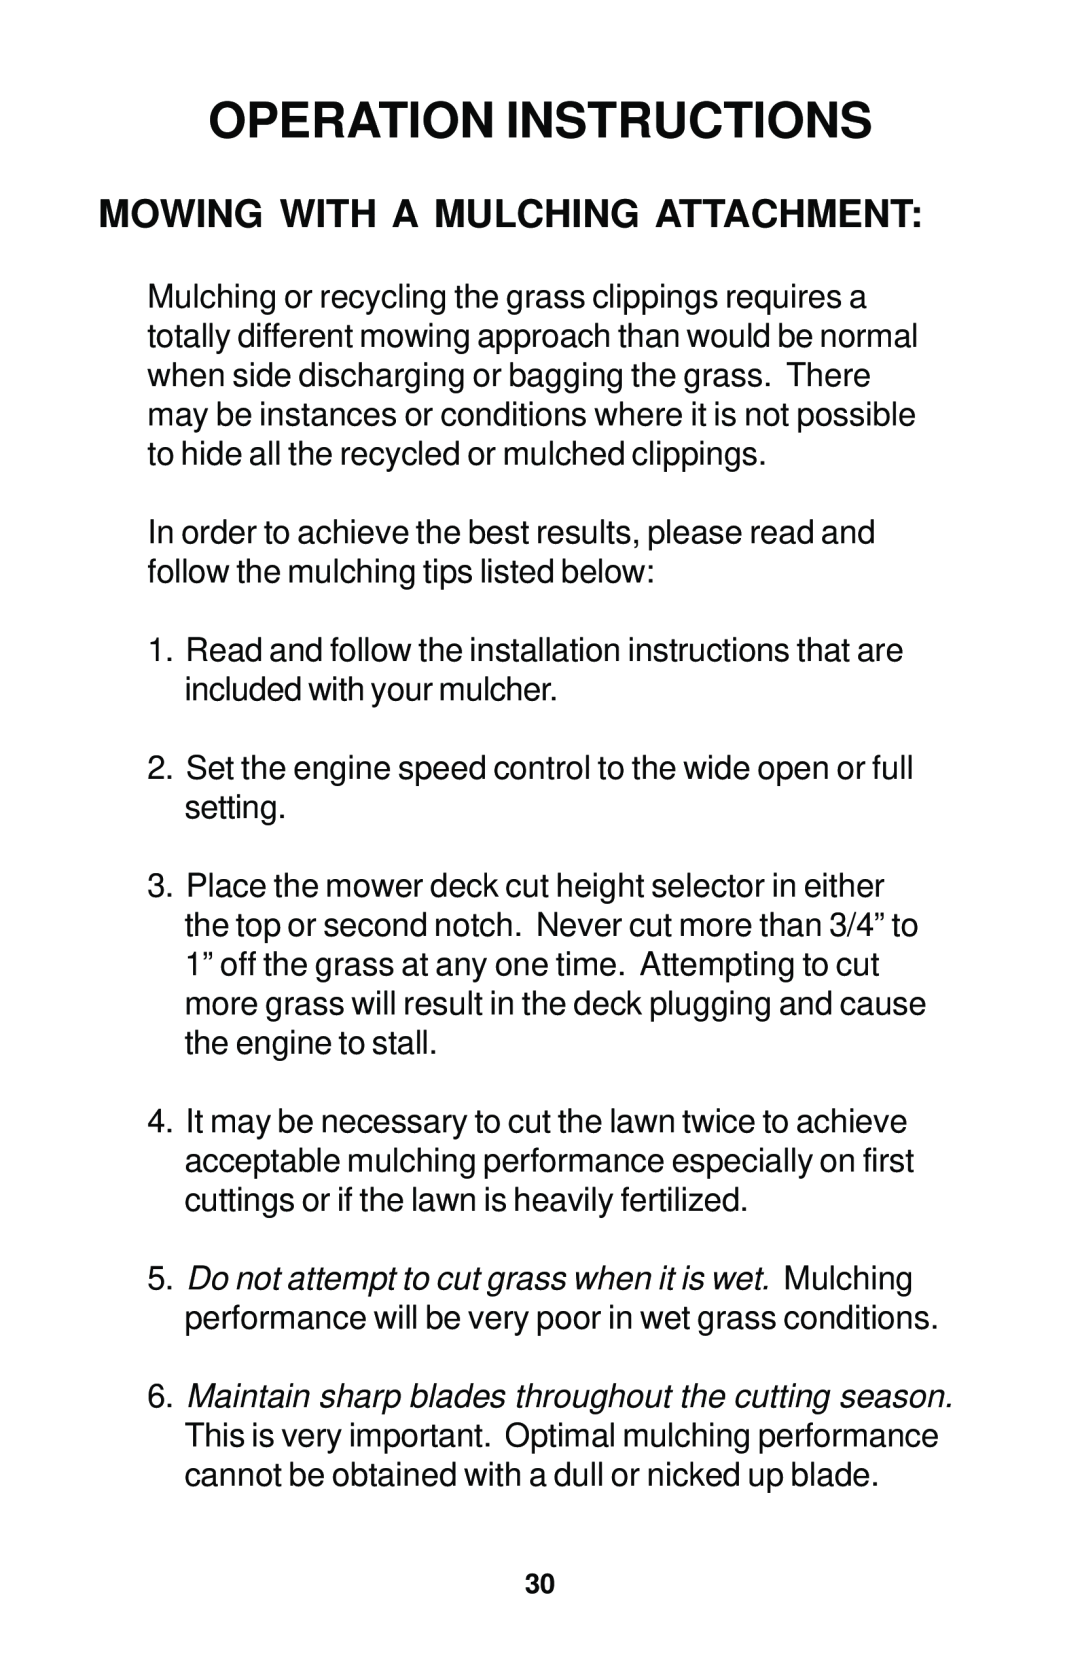 Dixon 17823-0704 manual Mowing With A Mulching Attachment, Operation Instructions 